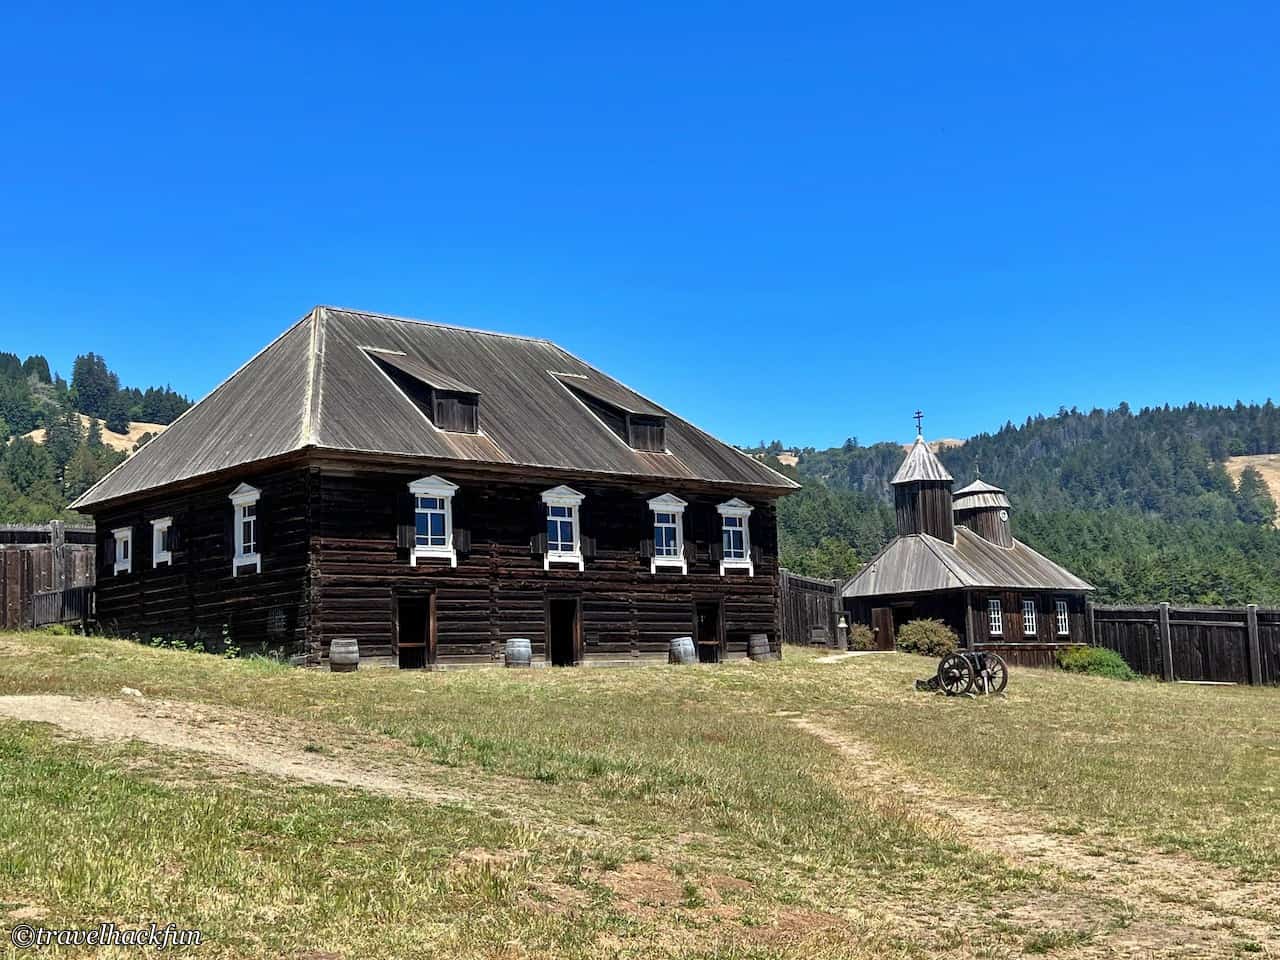 Fort Ross,俄羅斯堡,fort ross state park,fort ross state historic park,fort ross california 37